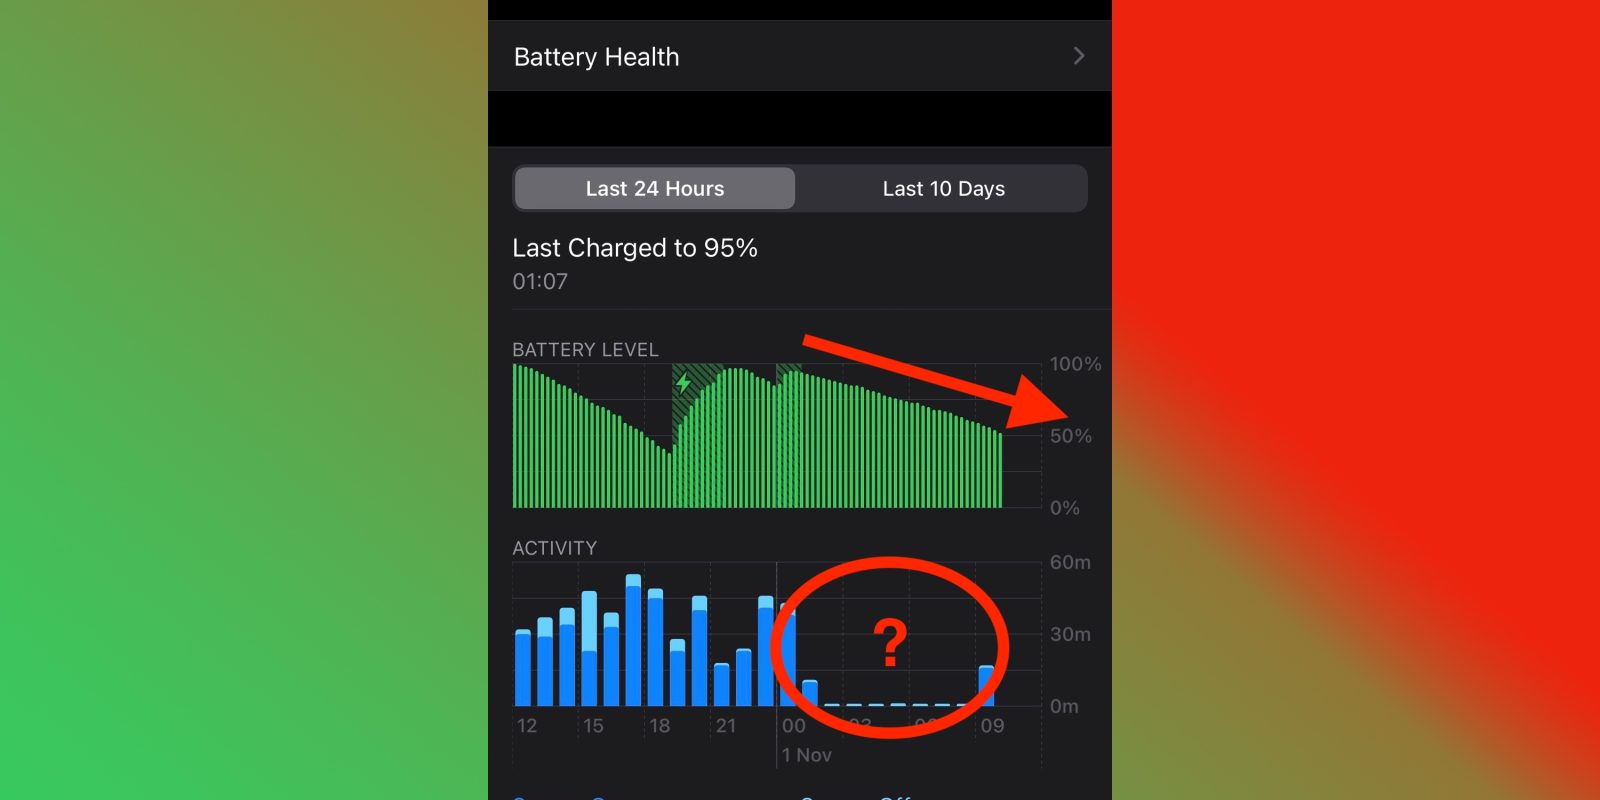 Med det samme vejr quagga iPhone 12 battery drain: Some seeing issues on standby - 9to5Mac